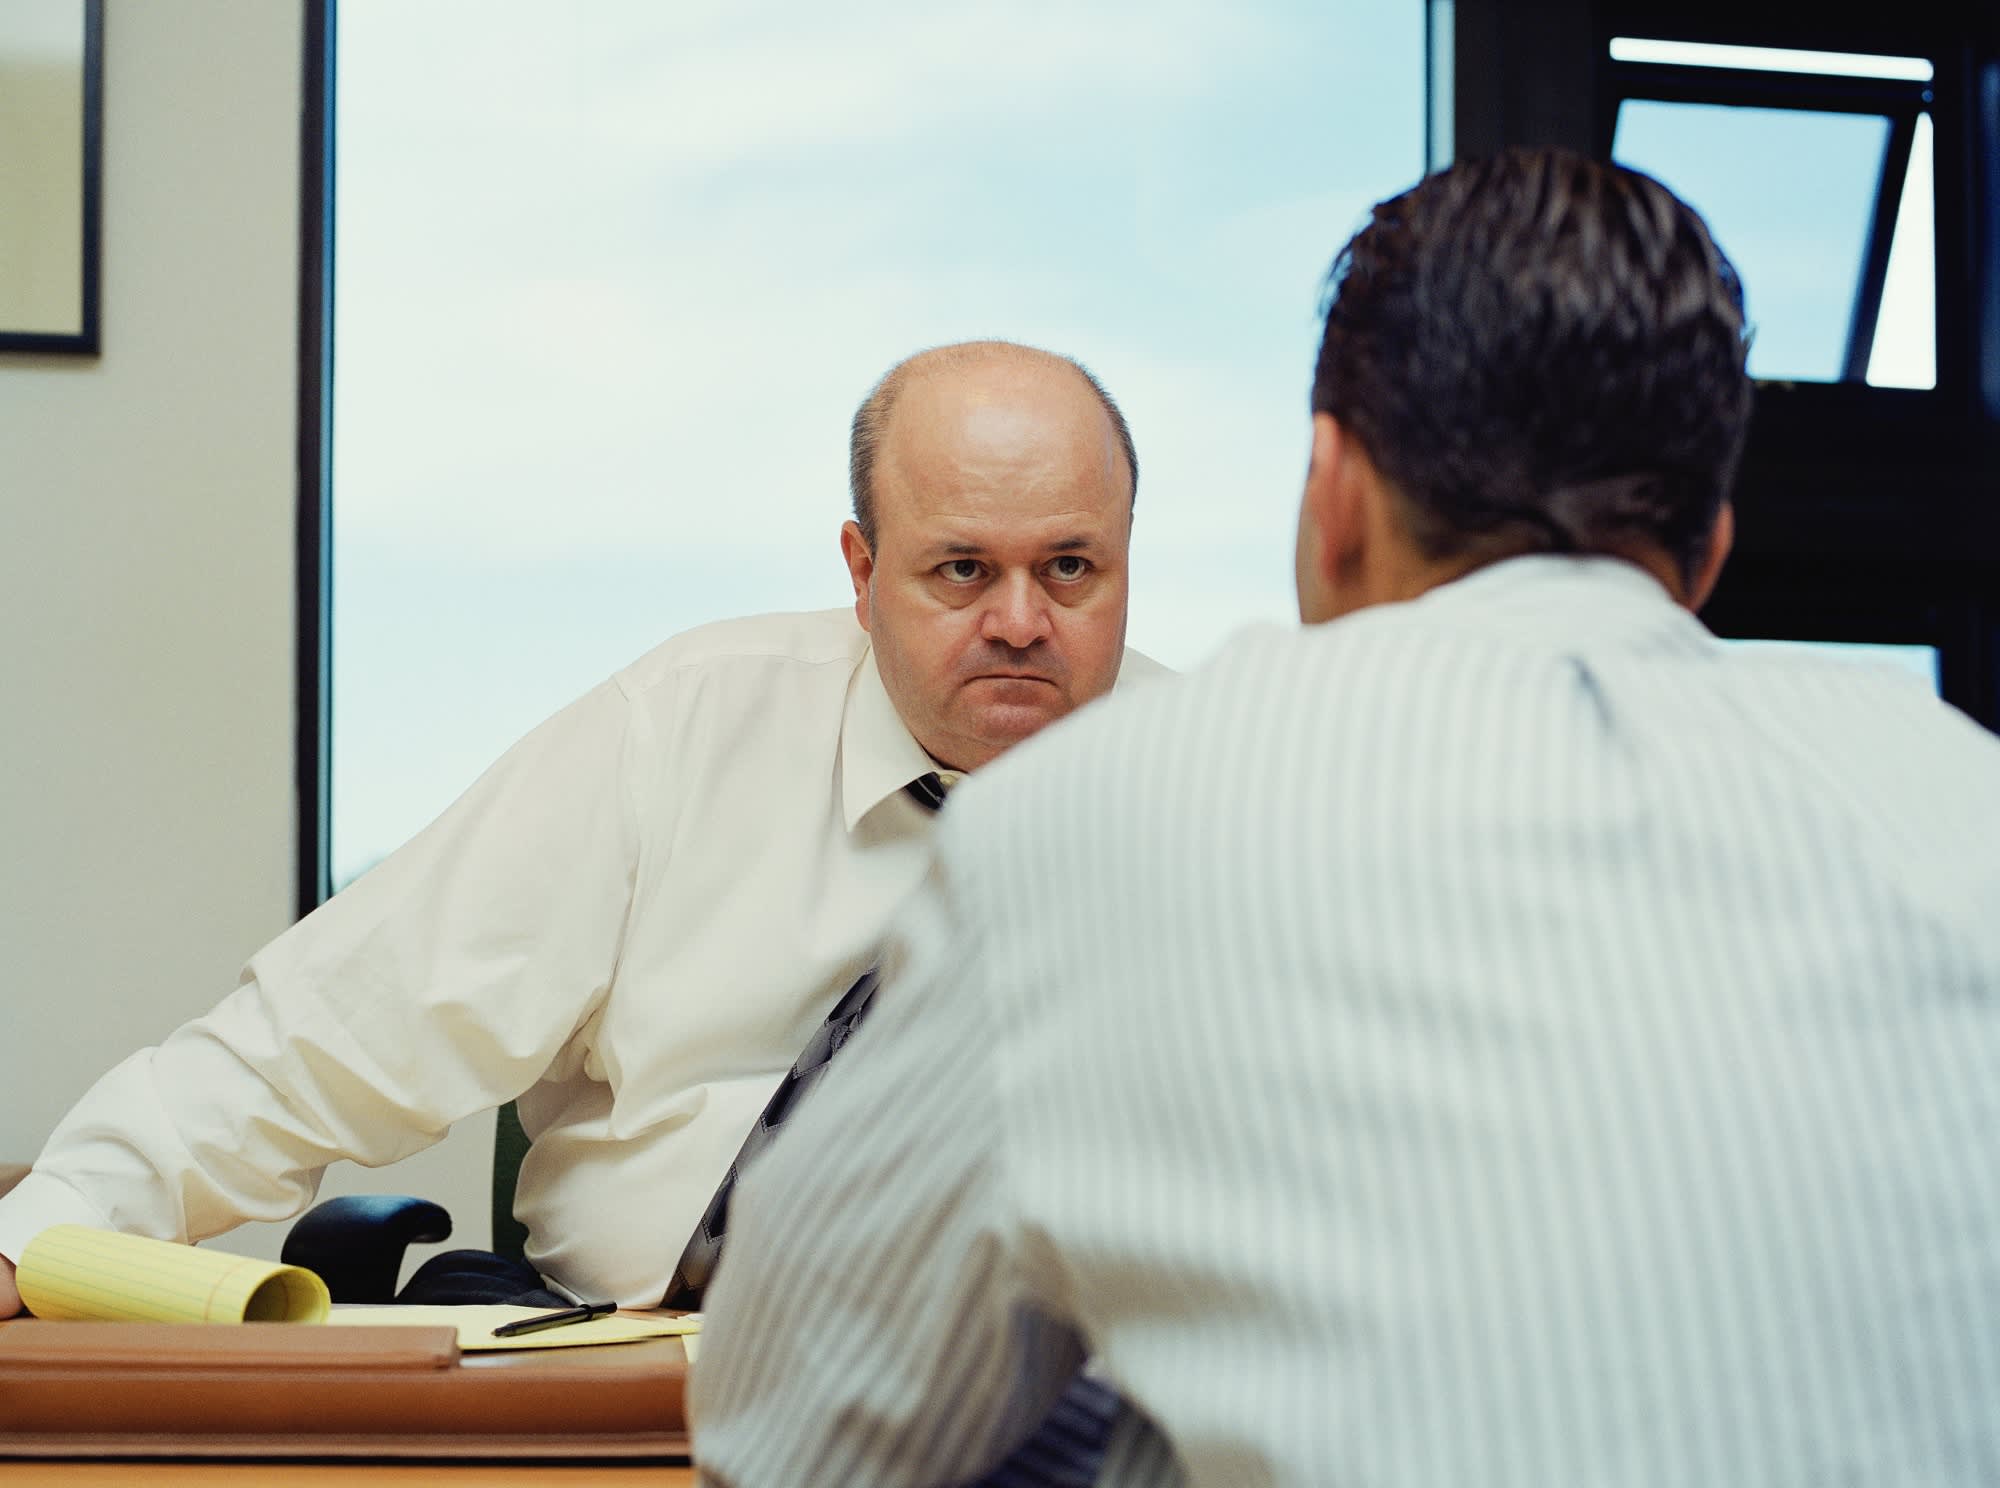 What to do if your boss bashes you in front of other employees